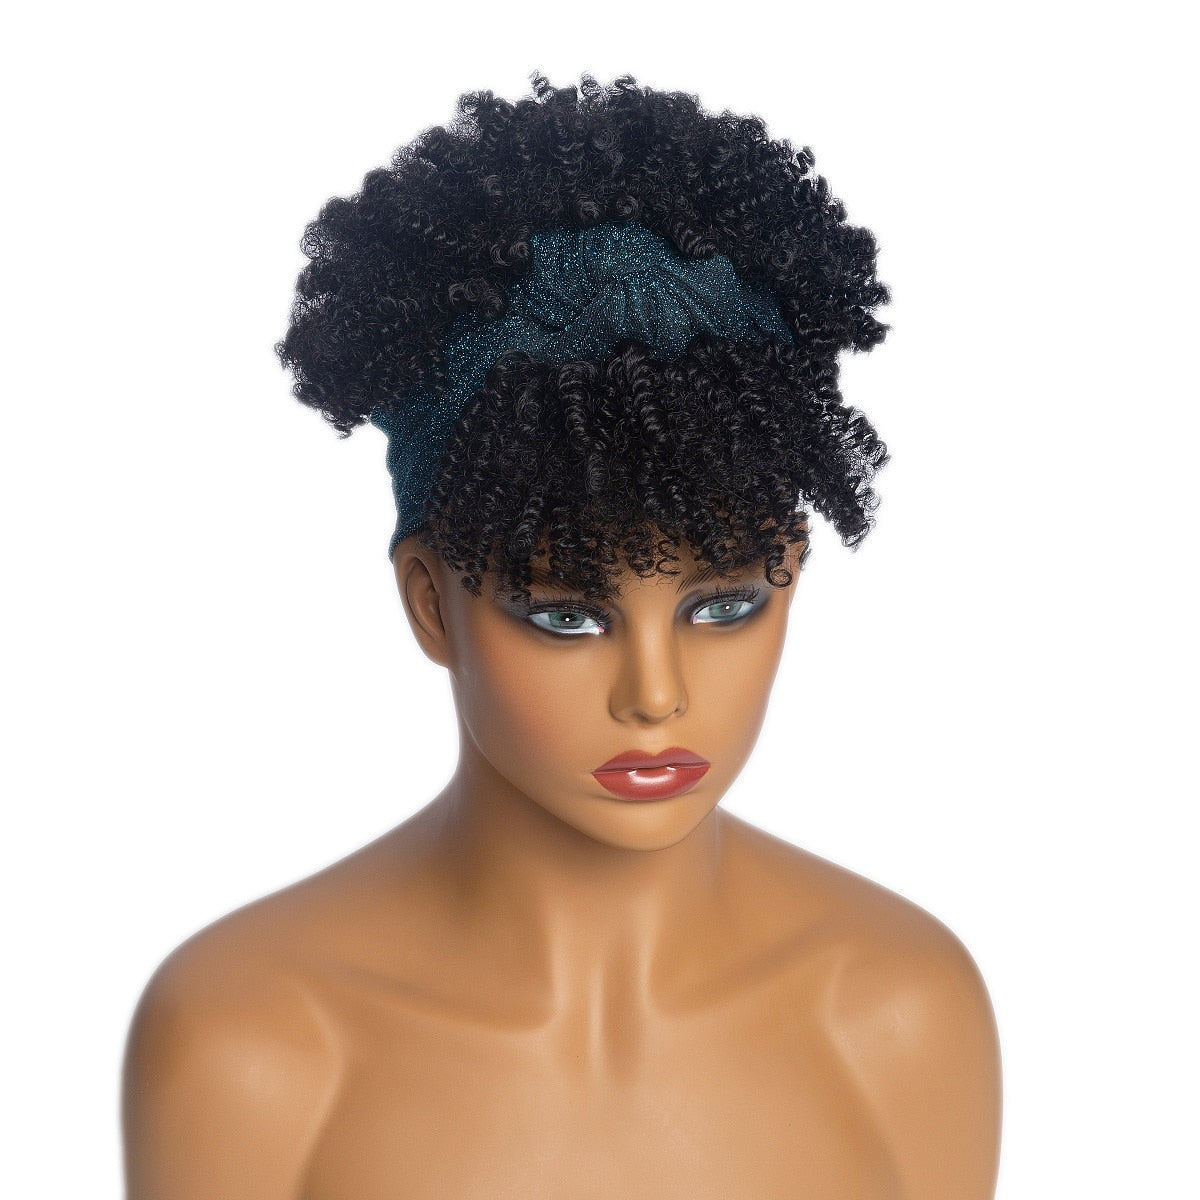 Afro Curly Head Wrap Wig Short Kinky Curly Women's Wigs with Turban Heat Resistant Synthetic Curly Headband Wig Peruca Cosplay